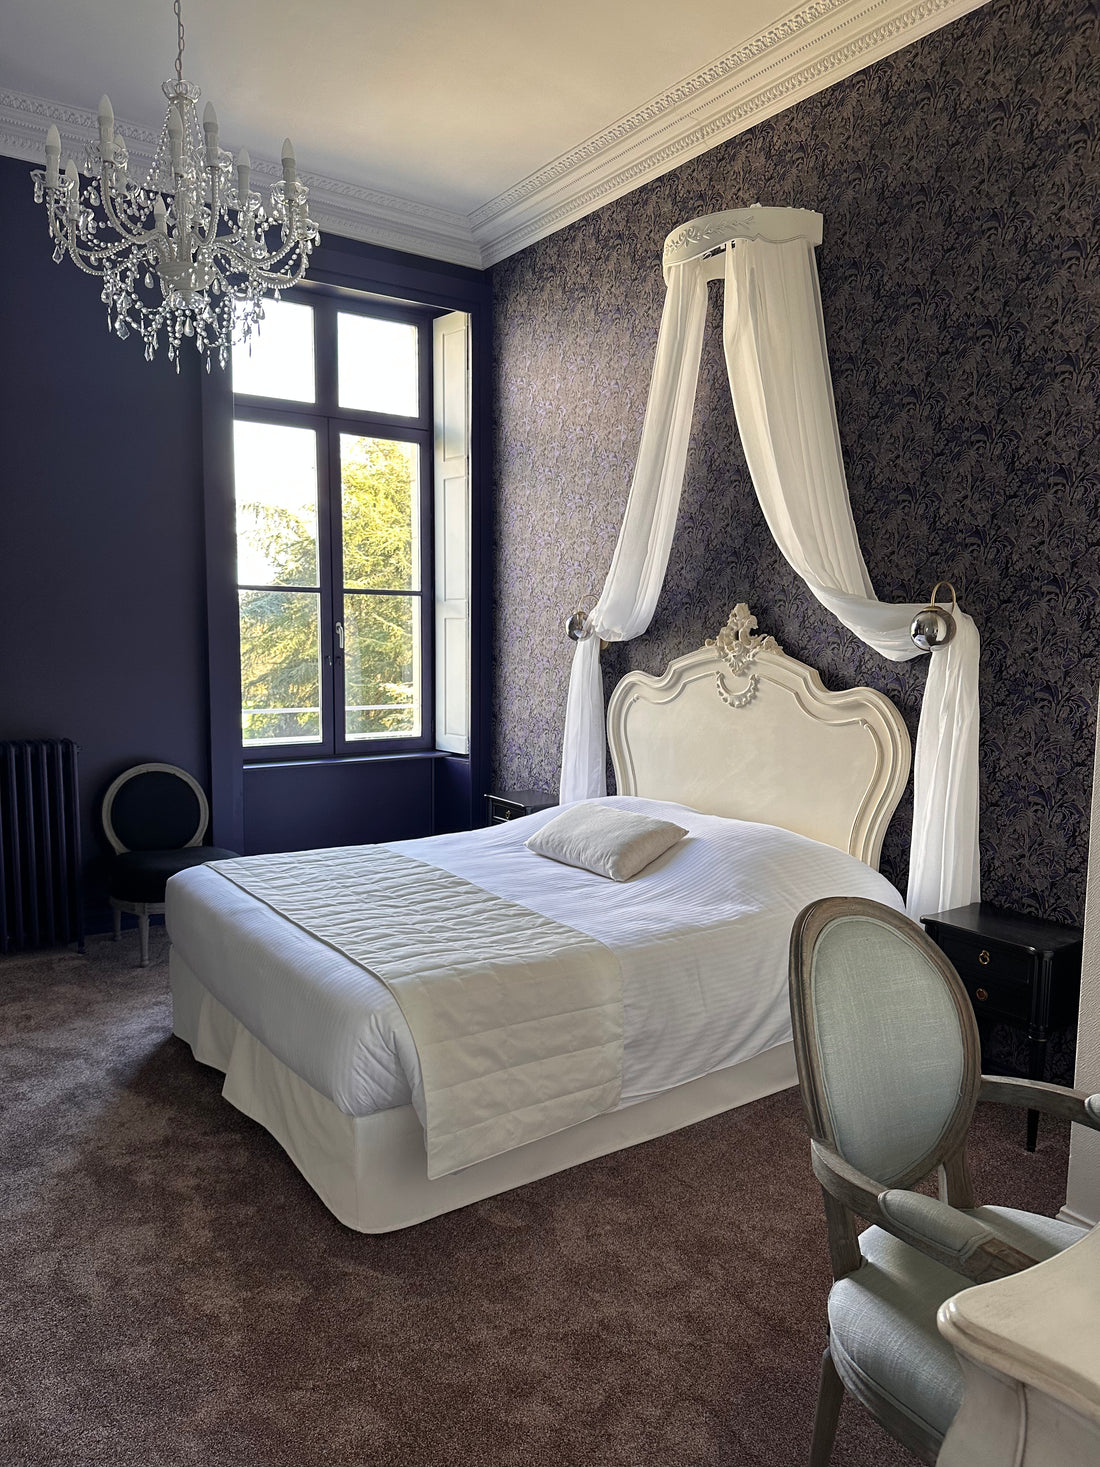 Room 1 at the Château: Marie Louise